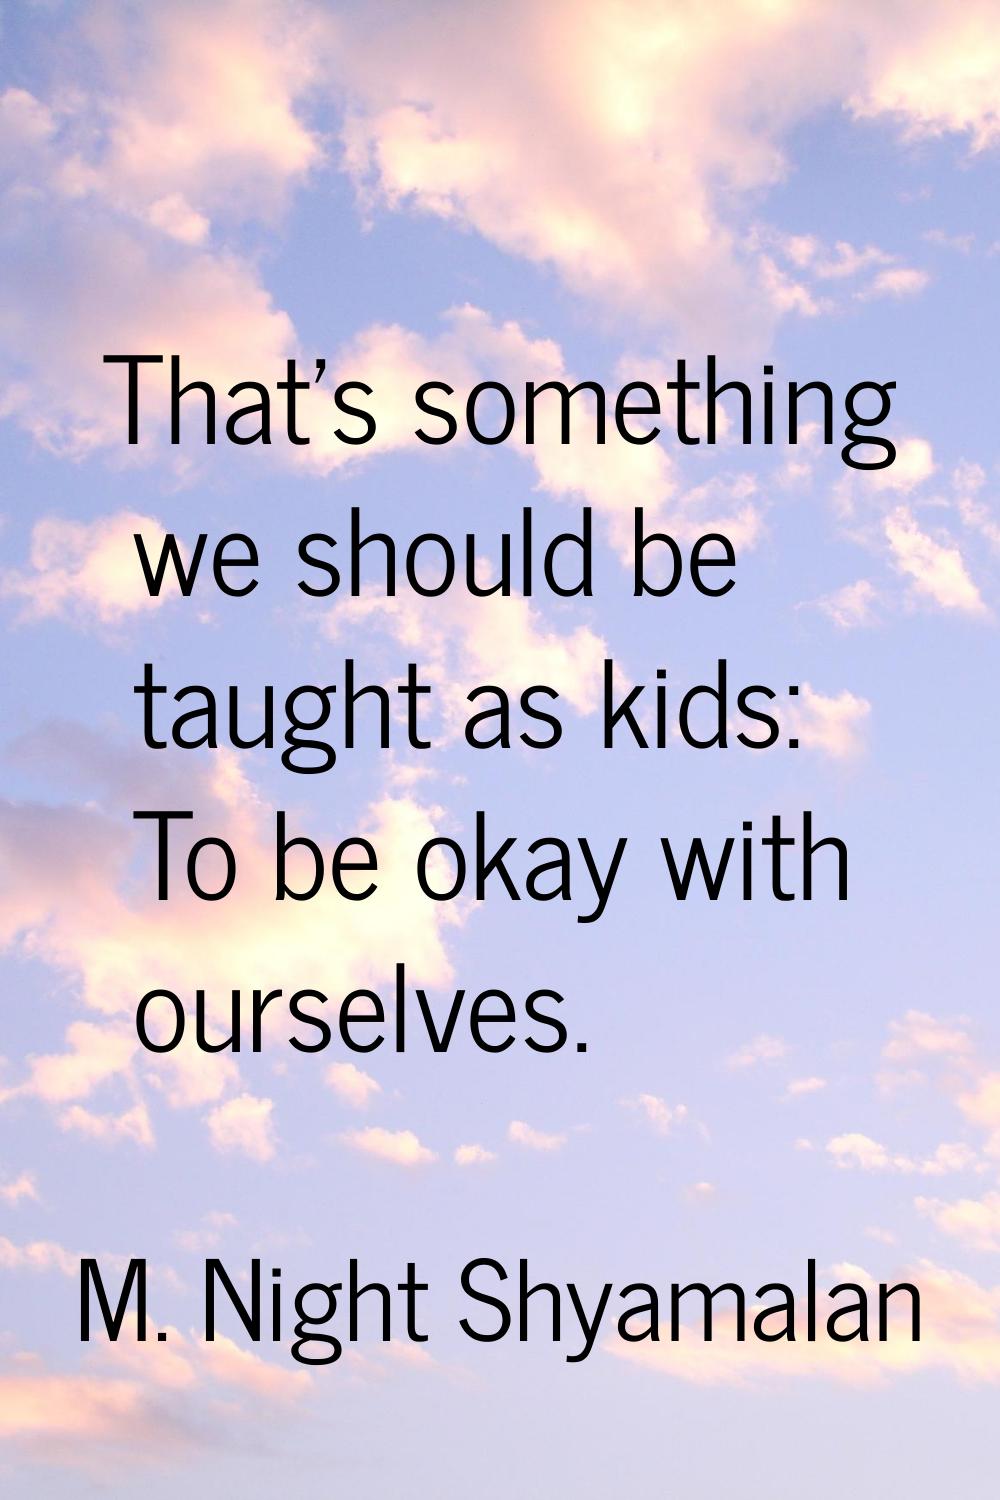 That's something we should be taught as kids: To be okay with ourselves.